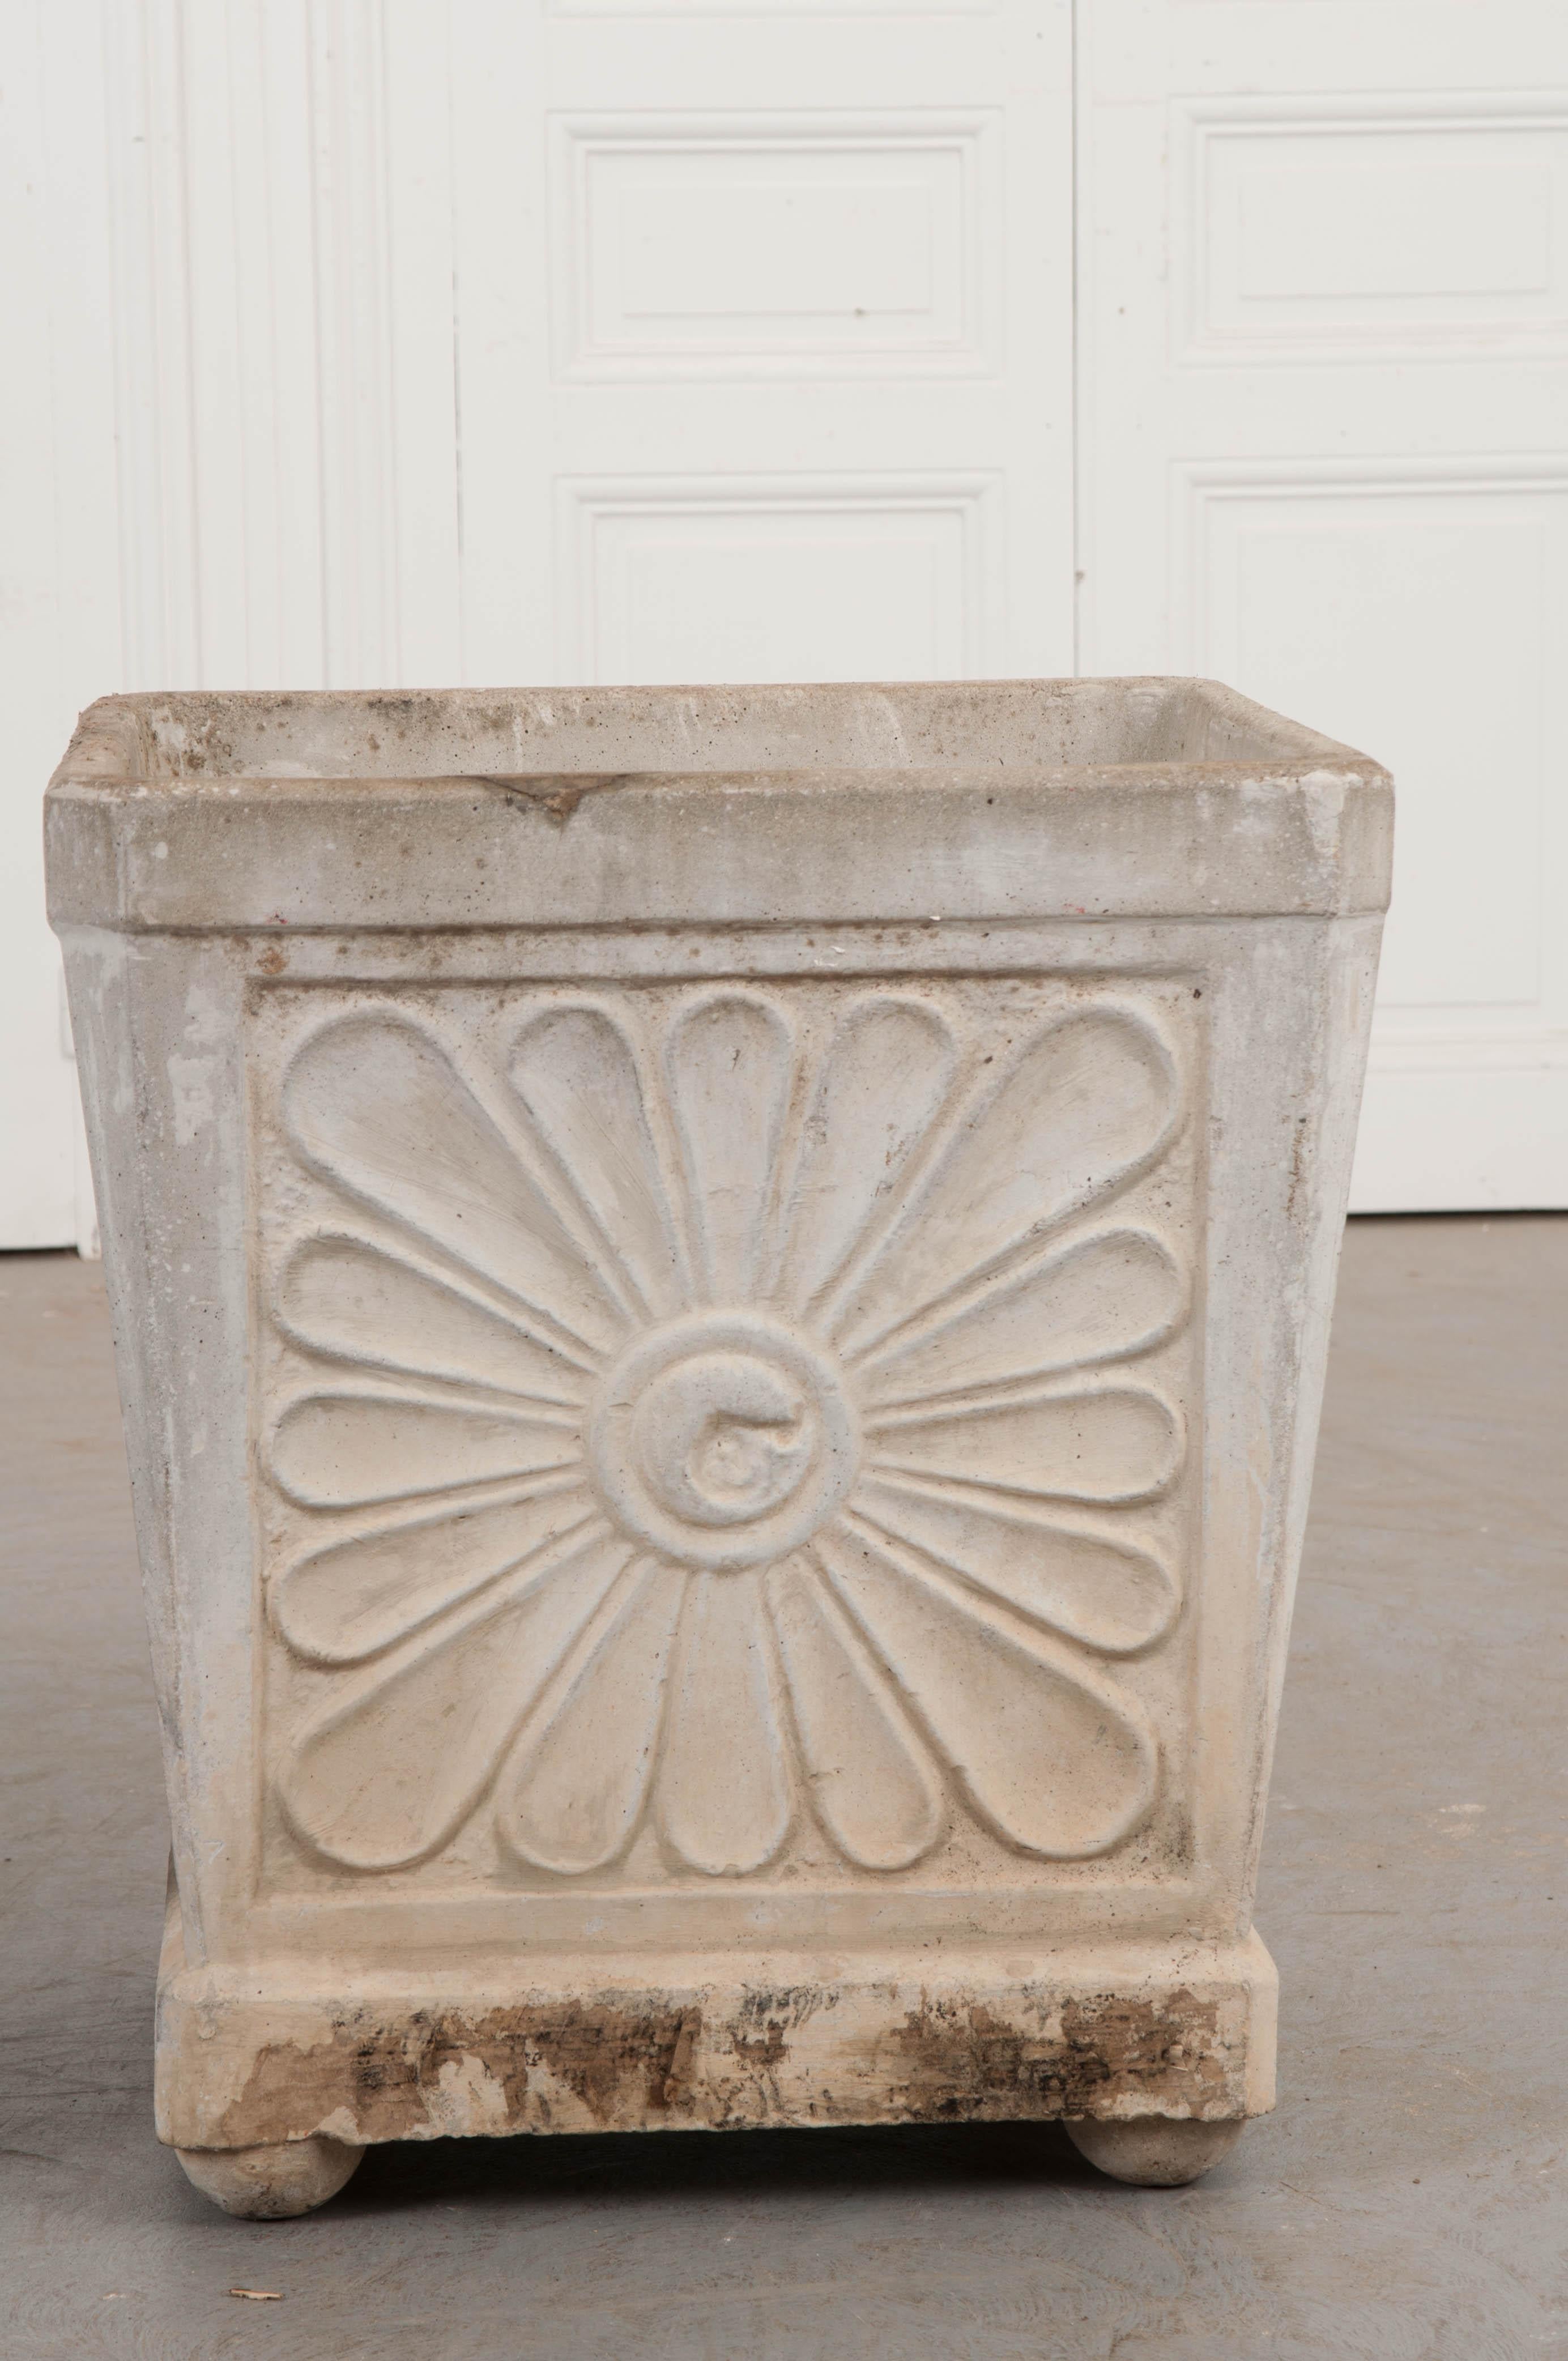 This delightful pair of vintage concrete planters, circa 1920, are from France. Of square section, each side features a single large blossom. The unique planters would look fantastic on a veranda or flanking an entrance.